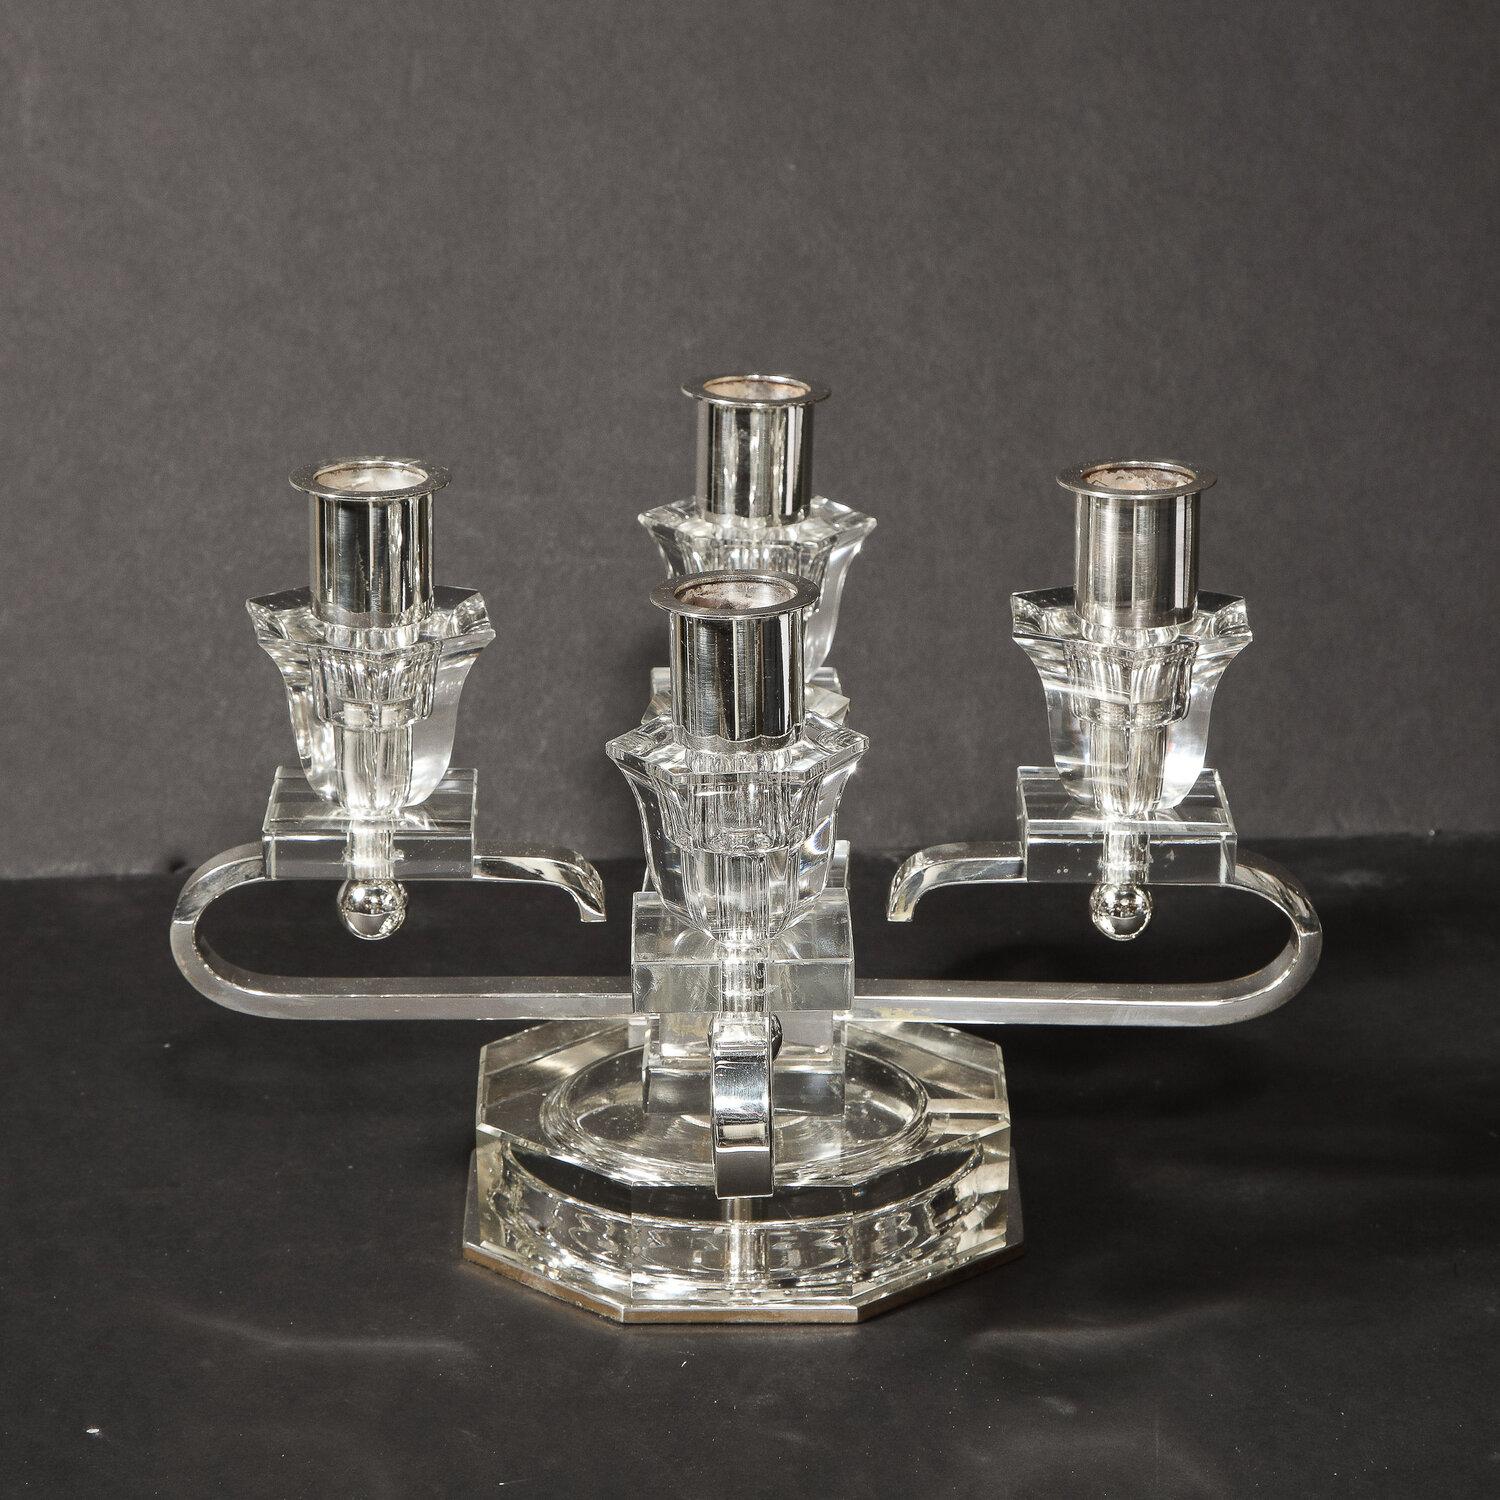 Pair of 1940s French Art Deco Four Arm Silverplate & Crystal Candleholders For Sale 1